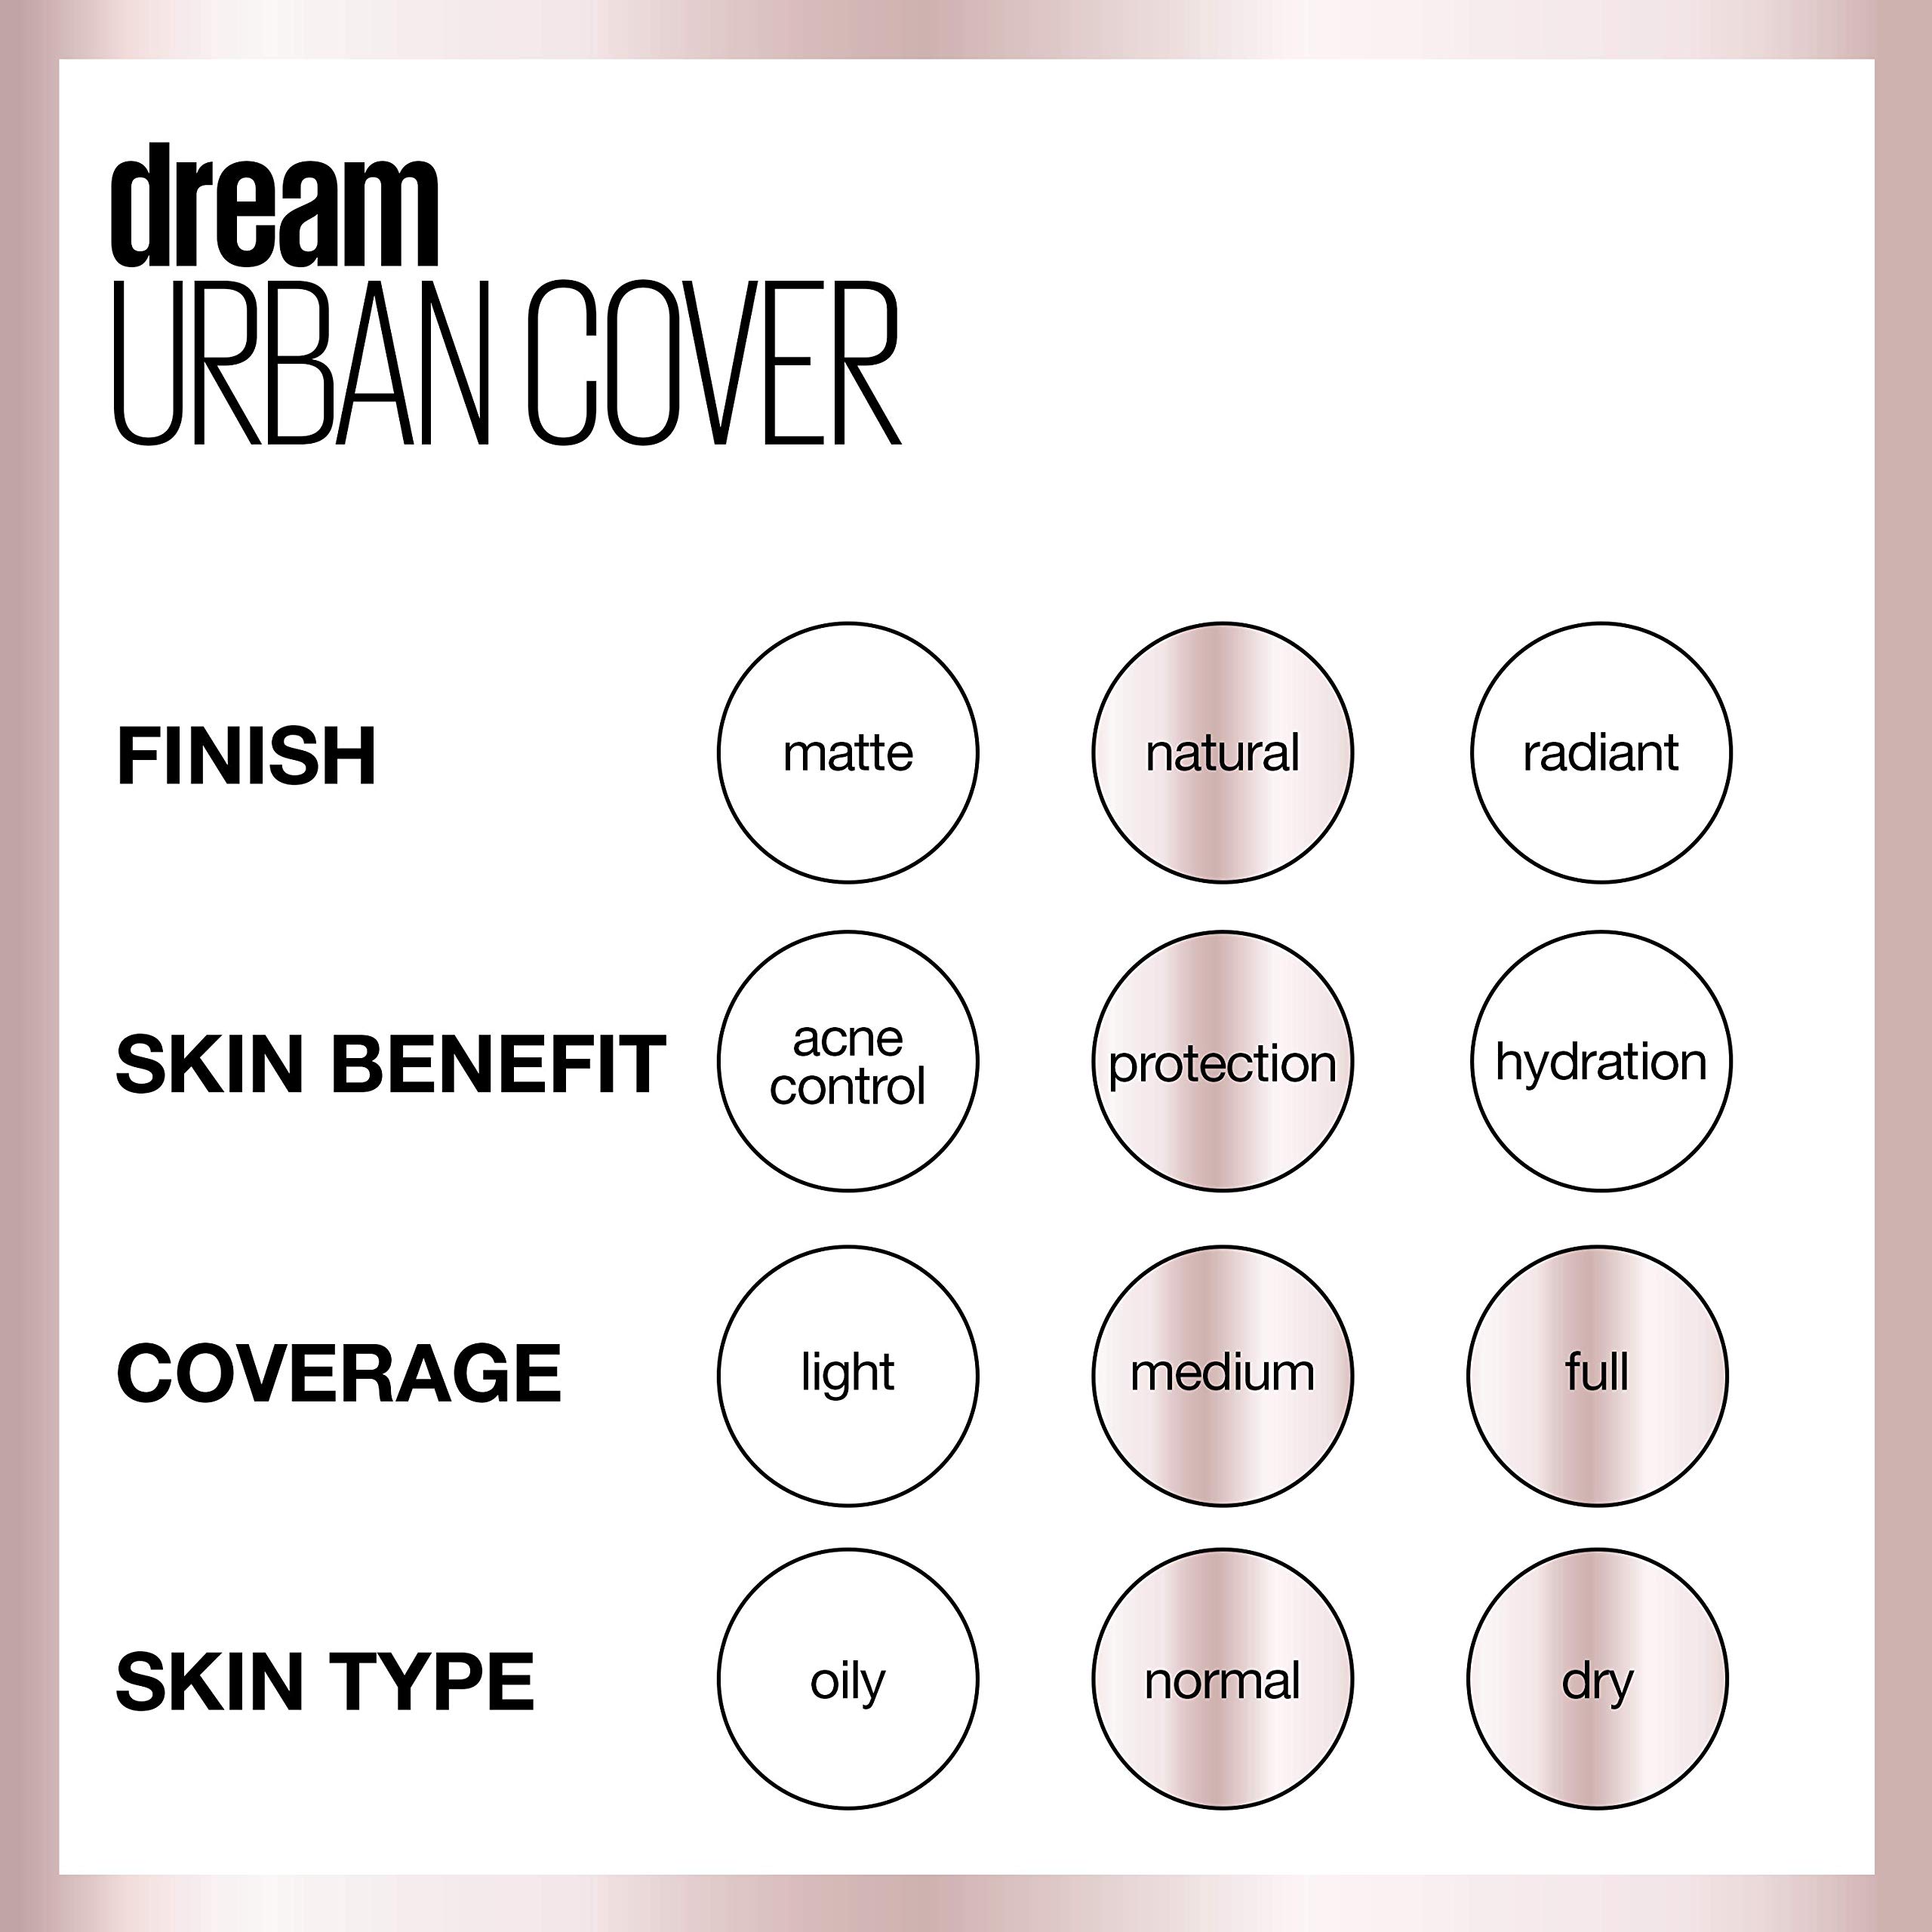 Maybelline Dream Urban Cover Flawless Coverage Foundation Makeup, SPF 50, Truffle